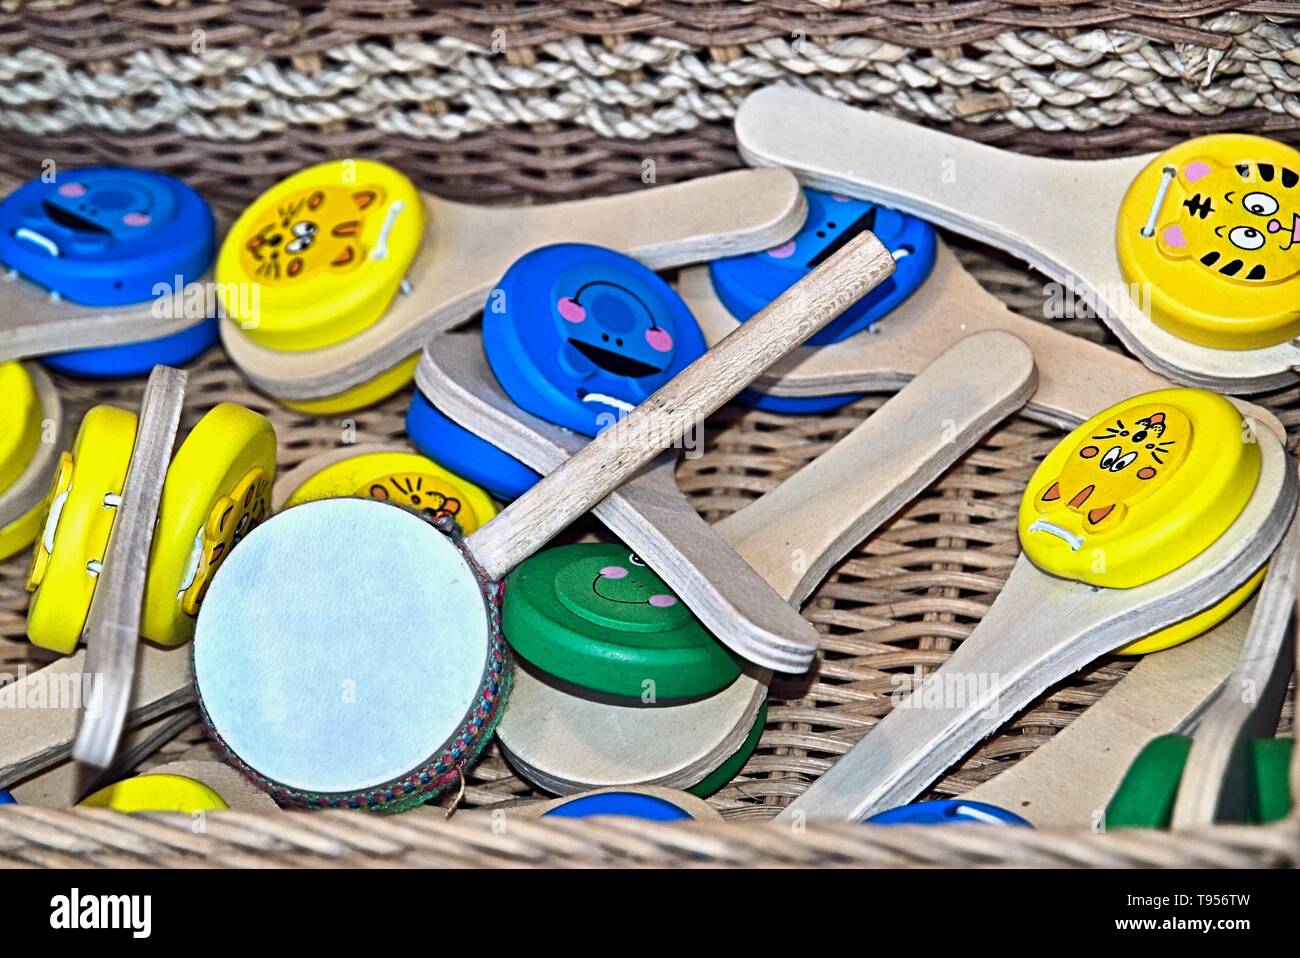 Colorful wooden music instruments for children at a market Stock Photo